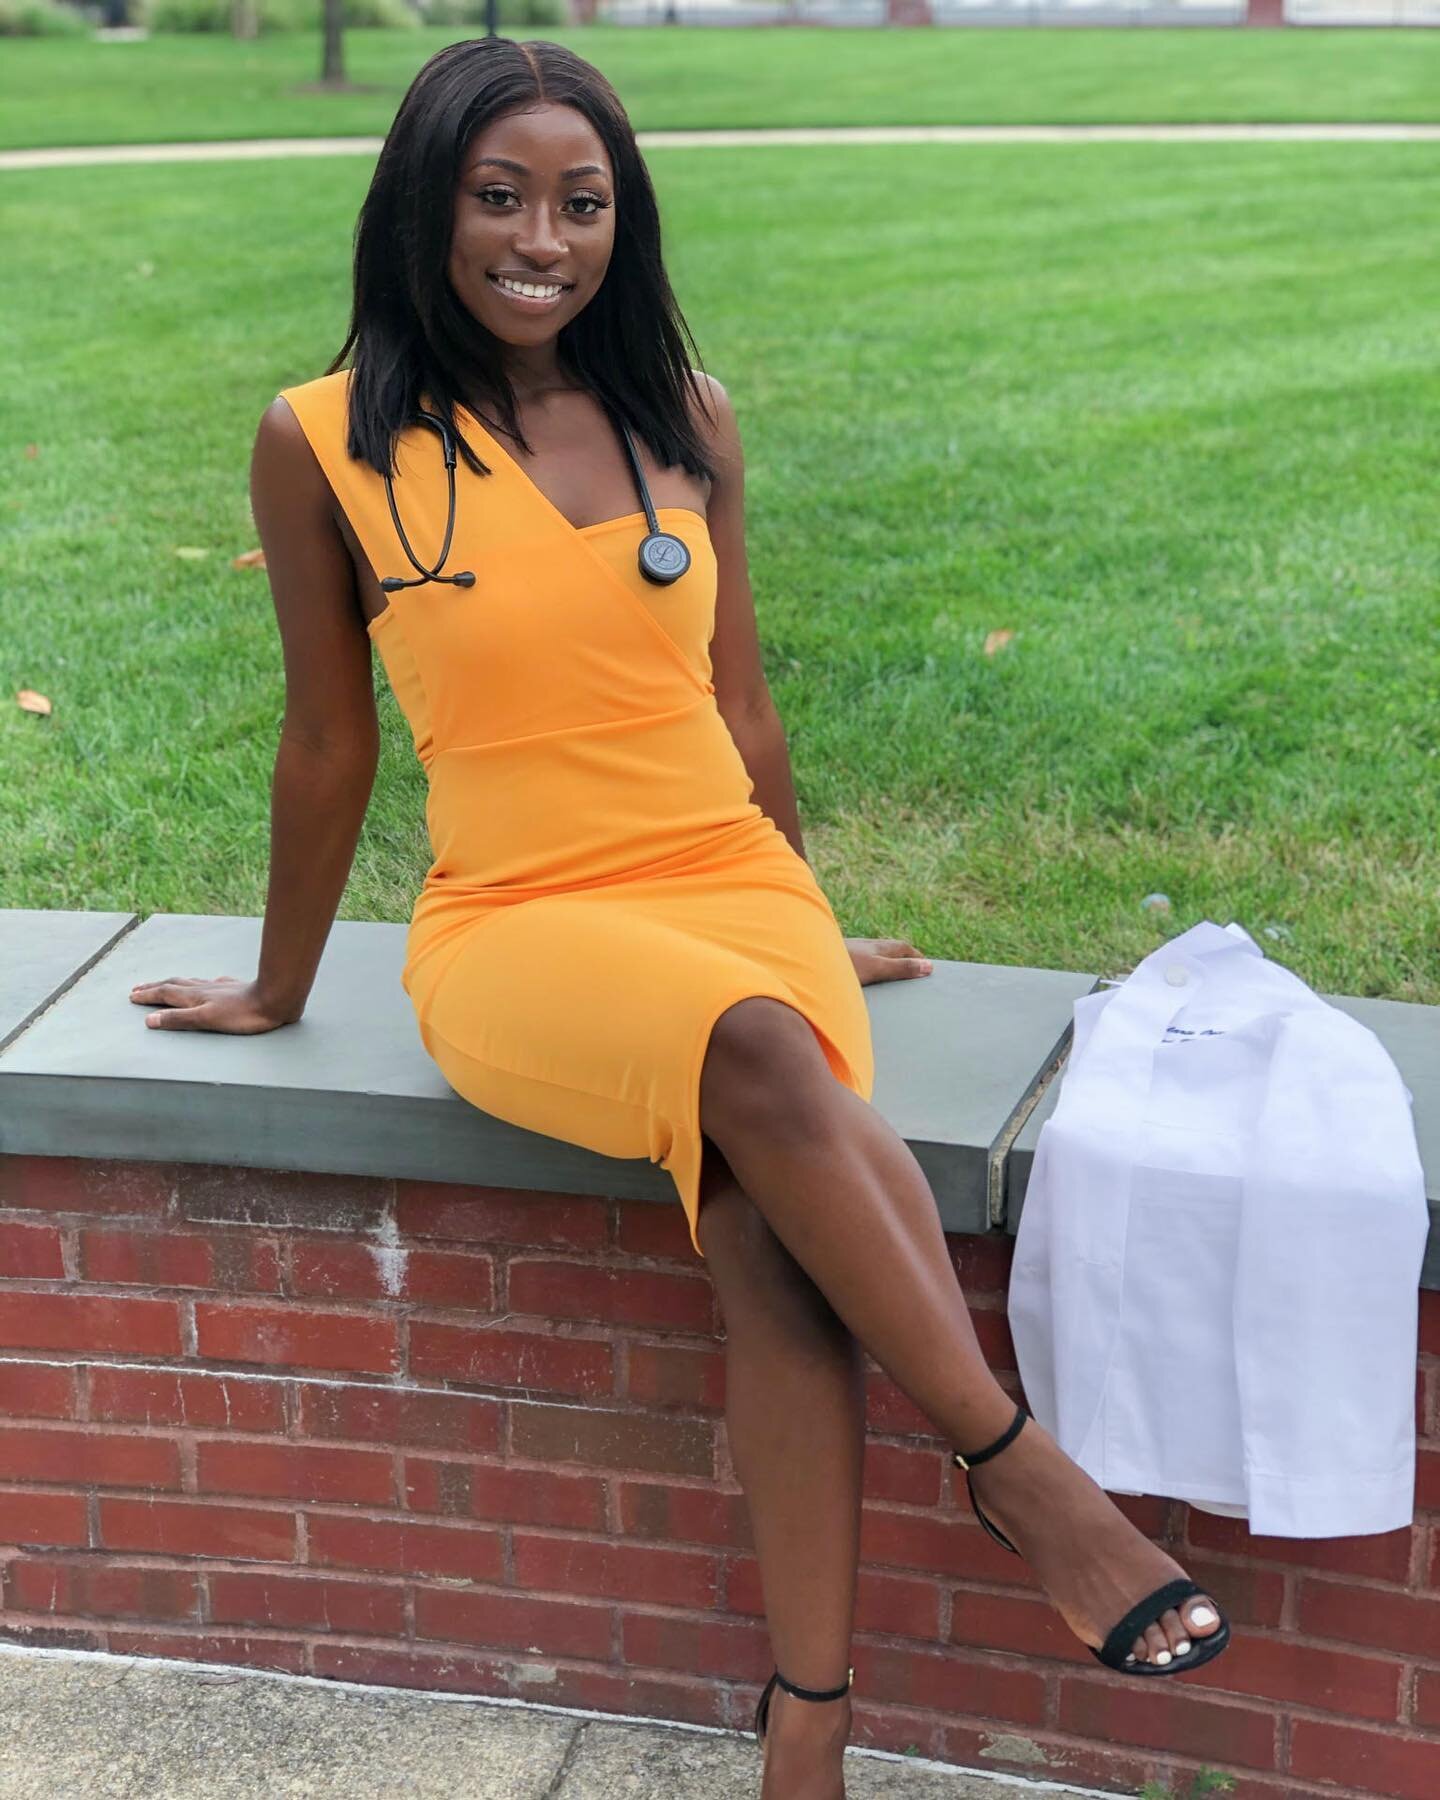 ✨ STUDENT SPOTLIGHT ✨

Name: Valarie Ogwo - Vice President of Research

Hometown: Houston, Texas

College/Education: Bachelors of Science in Sports Medicine at Howard University

Specialty of Interest: Undecided

Fun Fact:  I love to dance! It&rsquo;